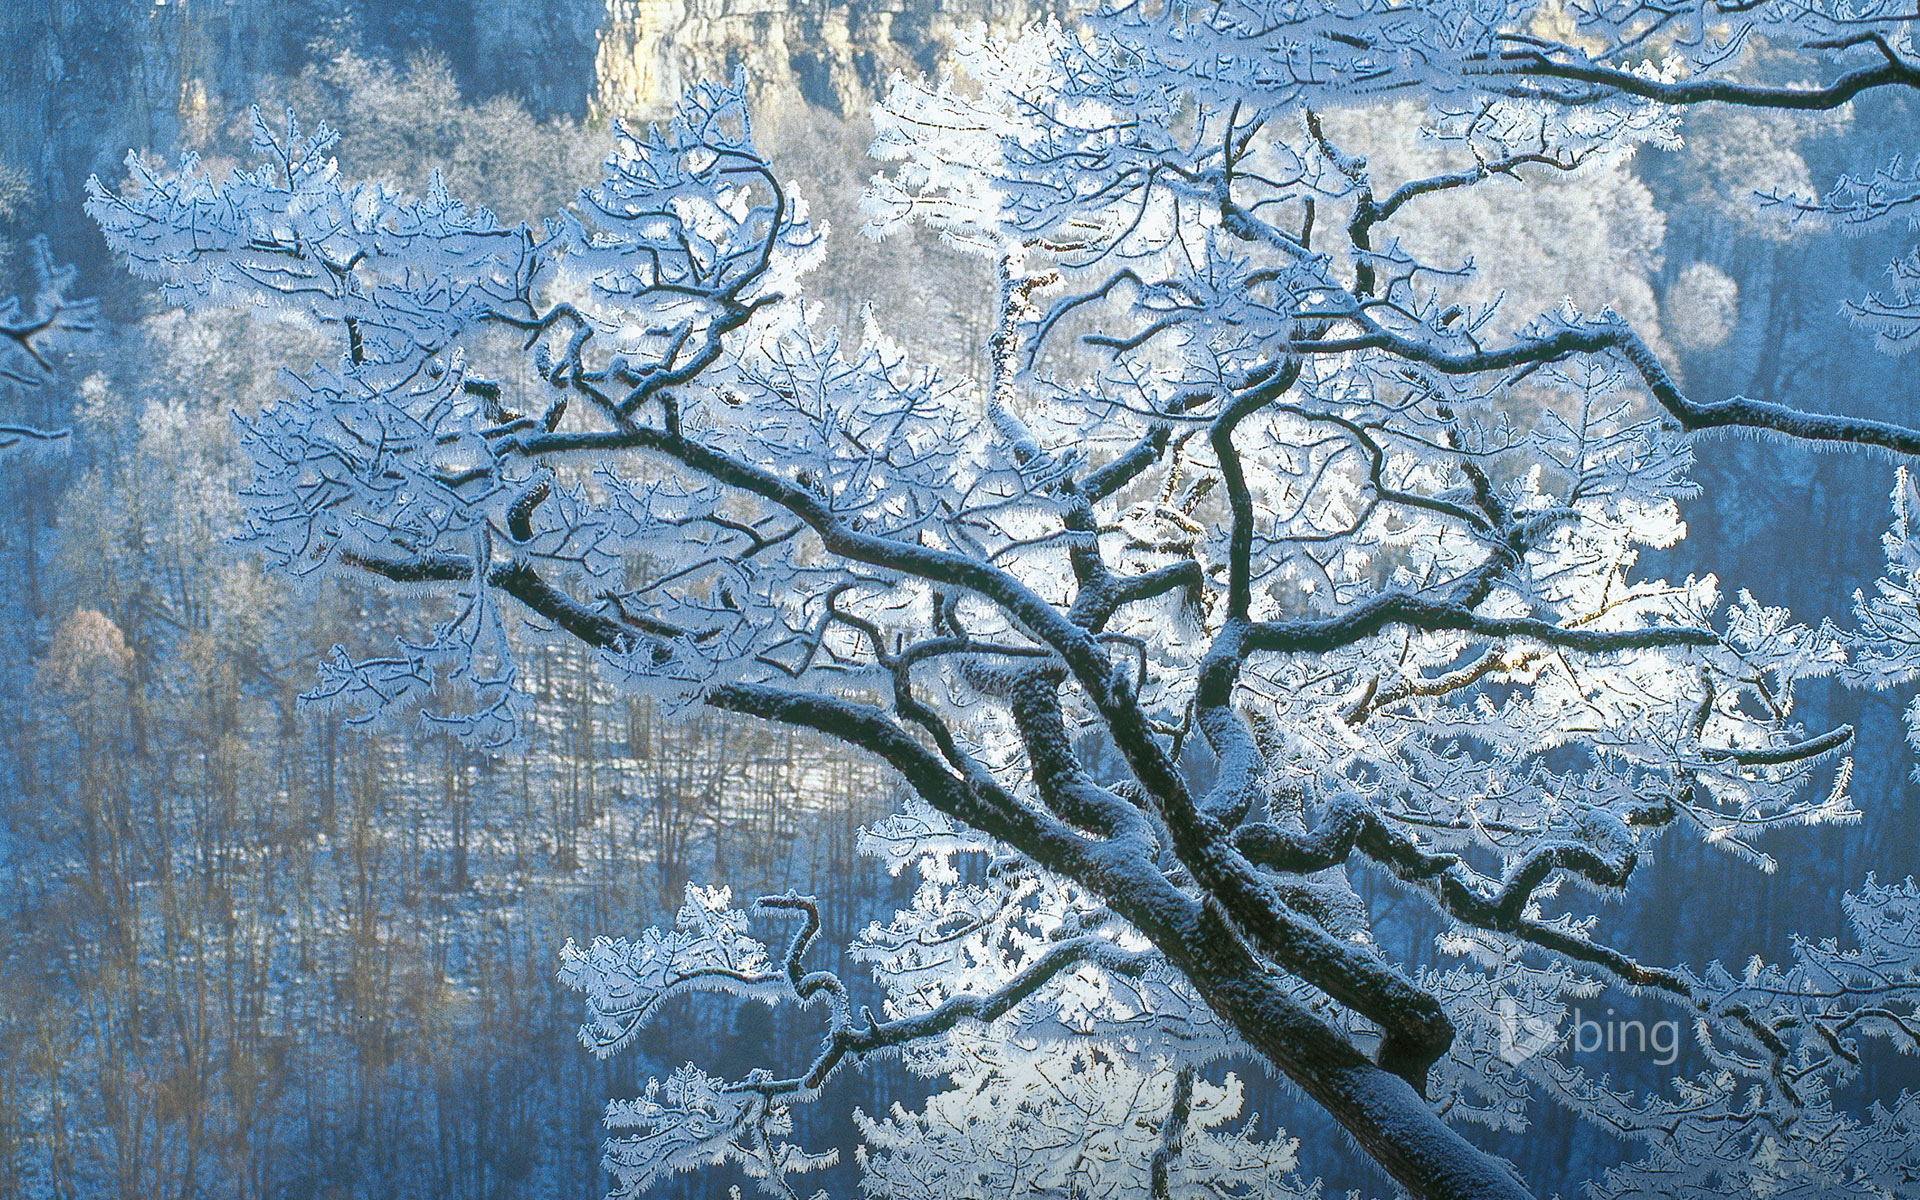 Oak branches covered in ice, Jura, France